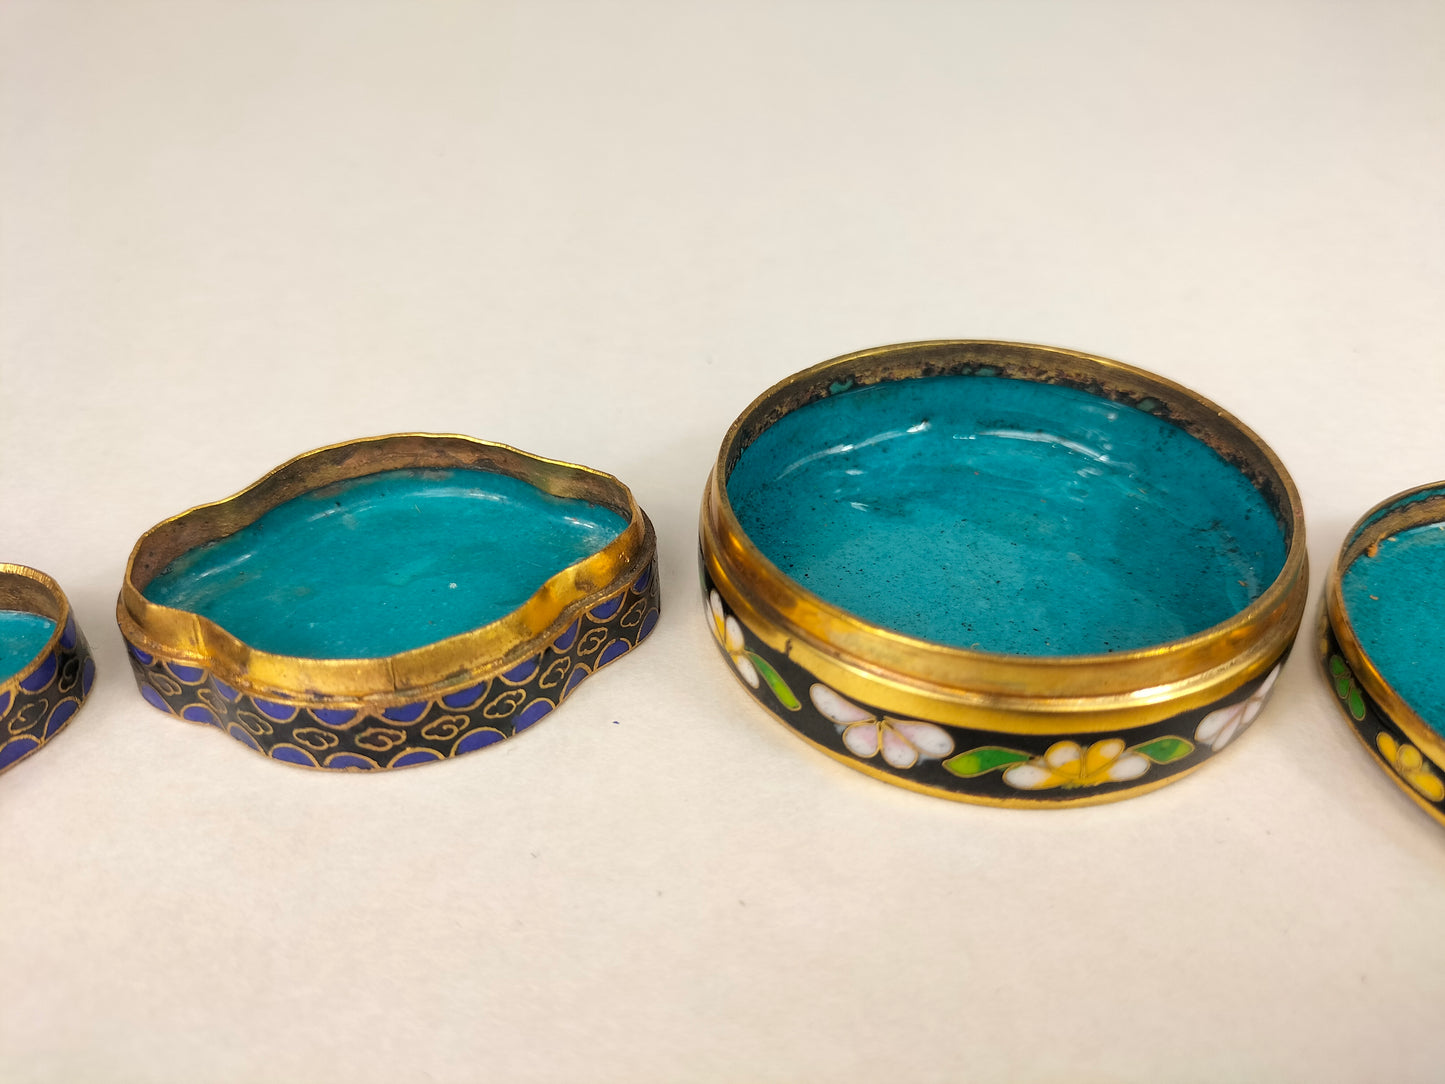 A set of 2 Chinese cloisonne lidded jewelry boxes decorated with flowers // 20th century